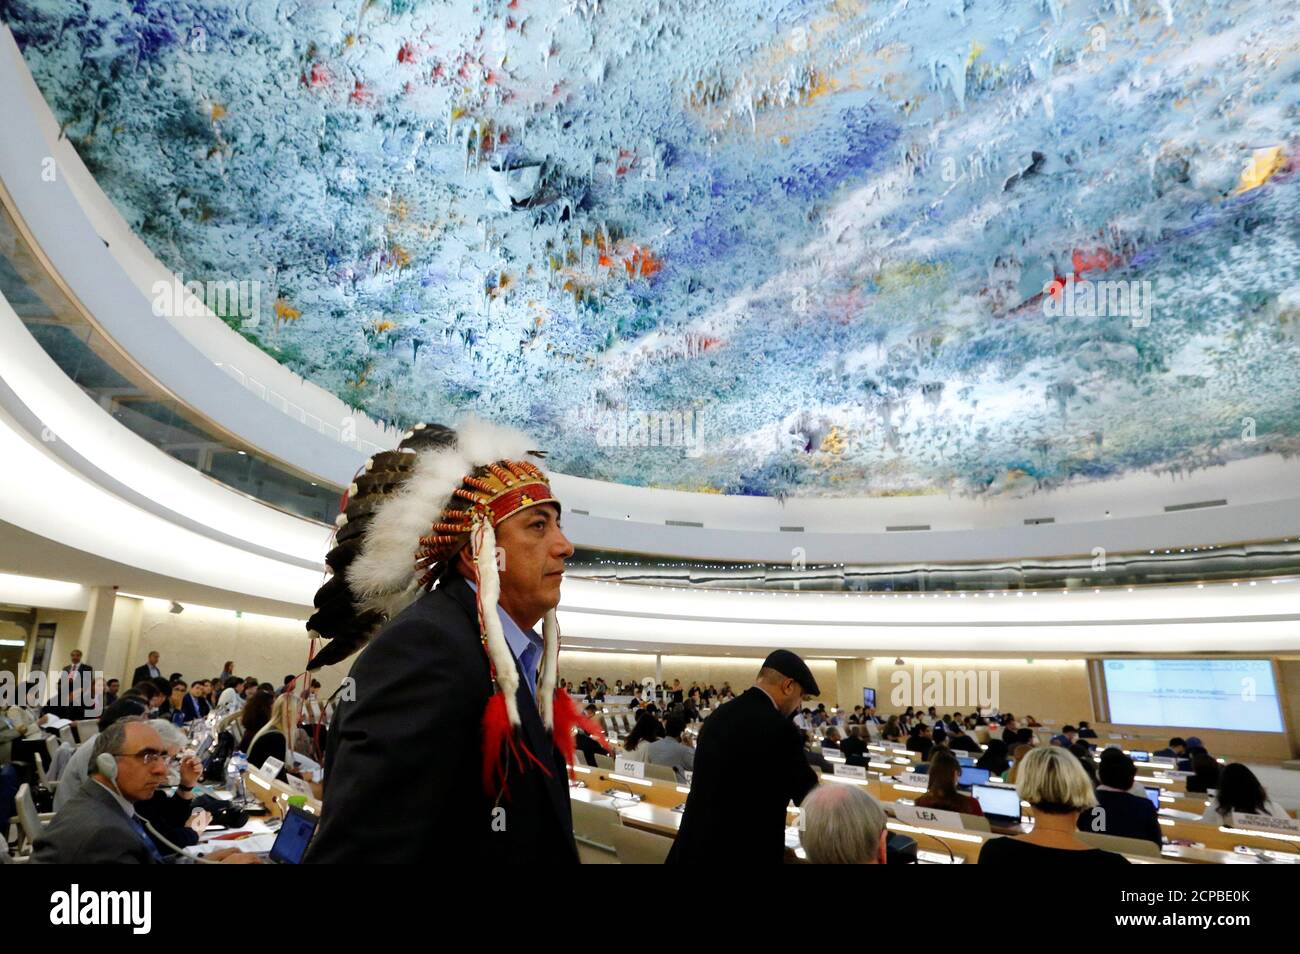 Dave Archambault II, chairman of the Standing Rock Sioux tribe, leaves after his speech against the Energy Transfer Partners' Dakota Access oil pipeline during the Human Rights Council at the United Nations in Geneva, Switzerland September 20, 2016. REUTERS/Denis Balibouse Stock Photo